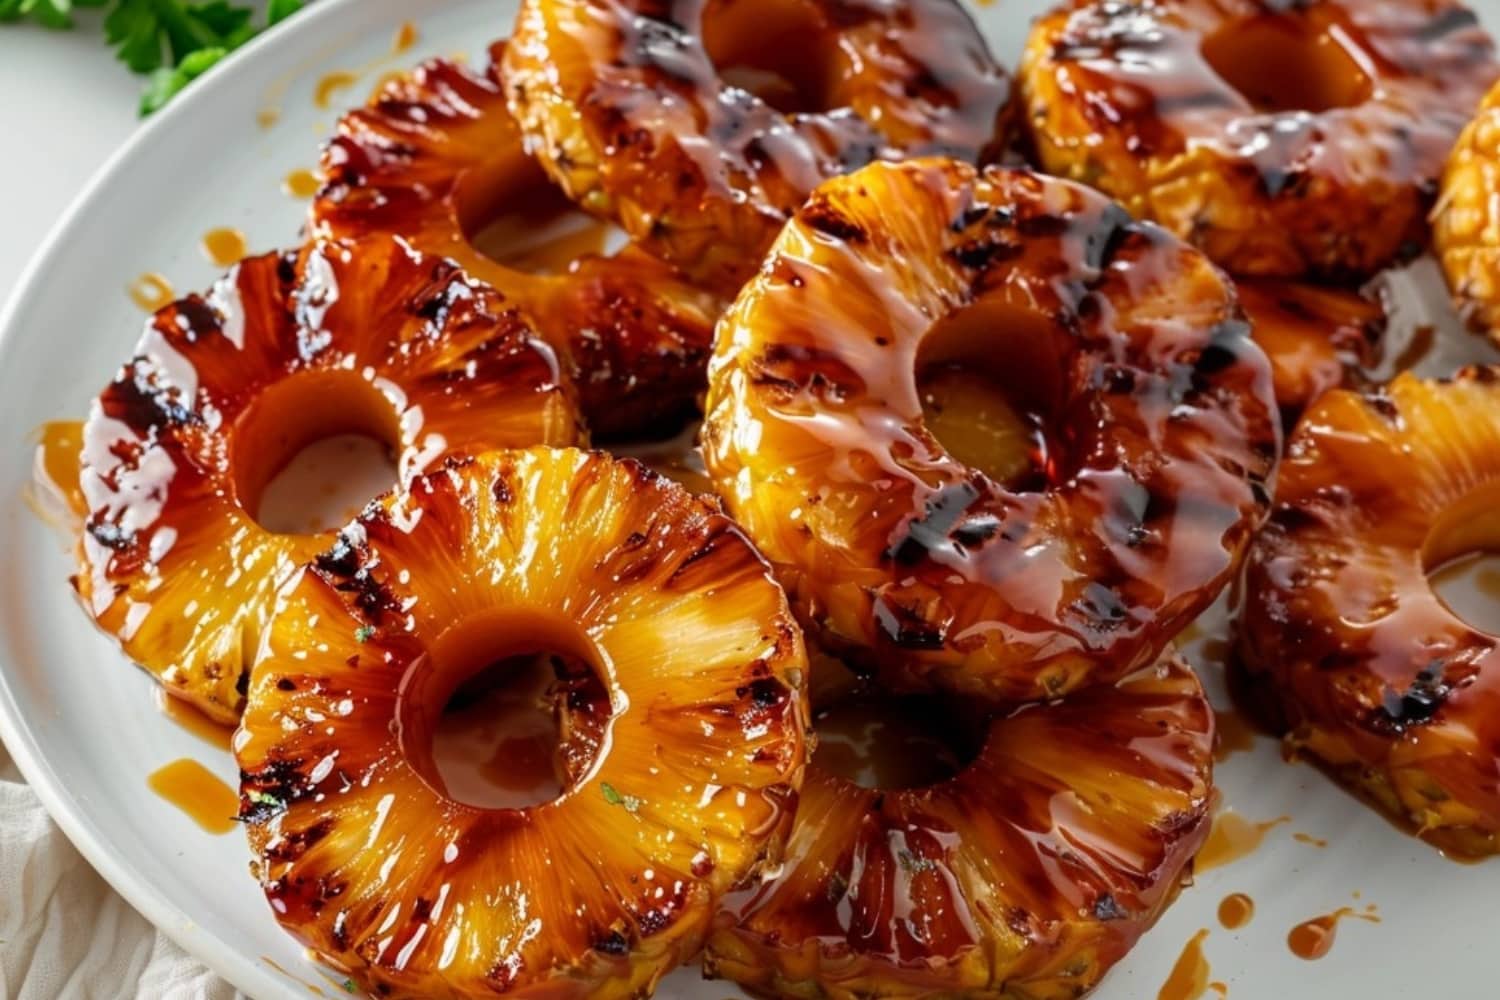 Grilled pineapple rings served in a white plate, with sugar glaze.